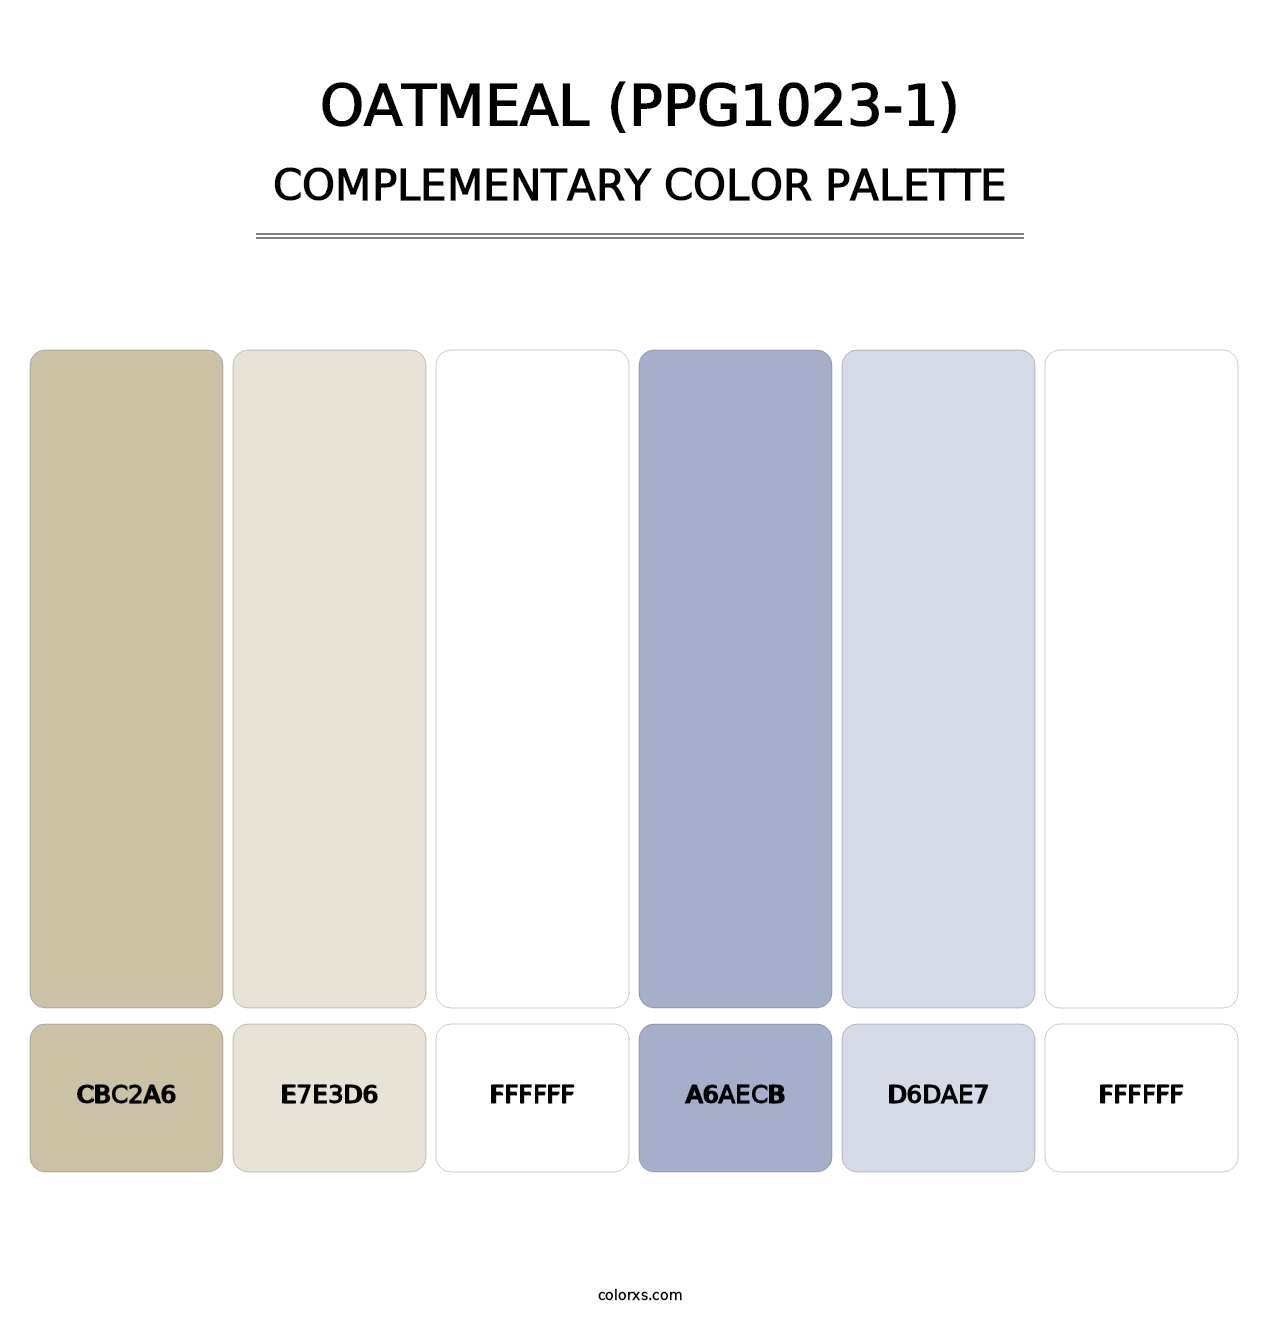 Oatmeal (PPG1023-1) - Complementary Color Palette